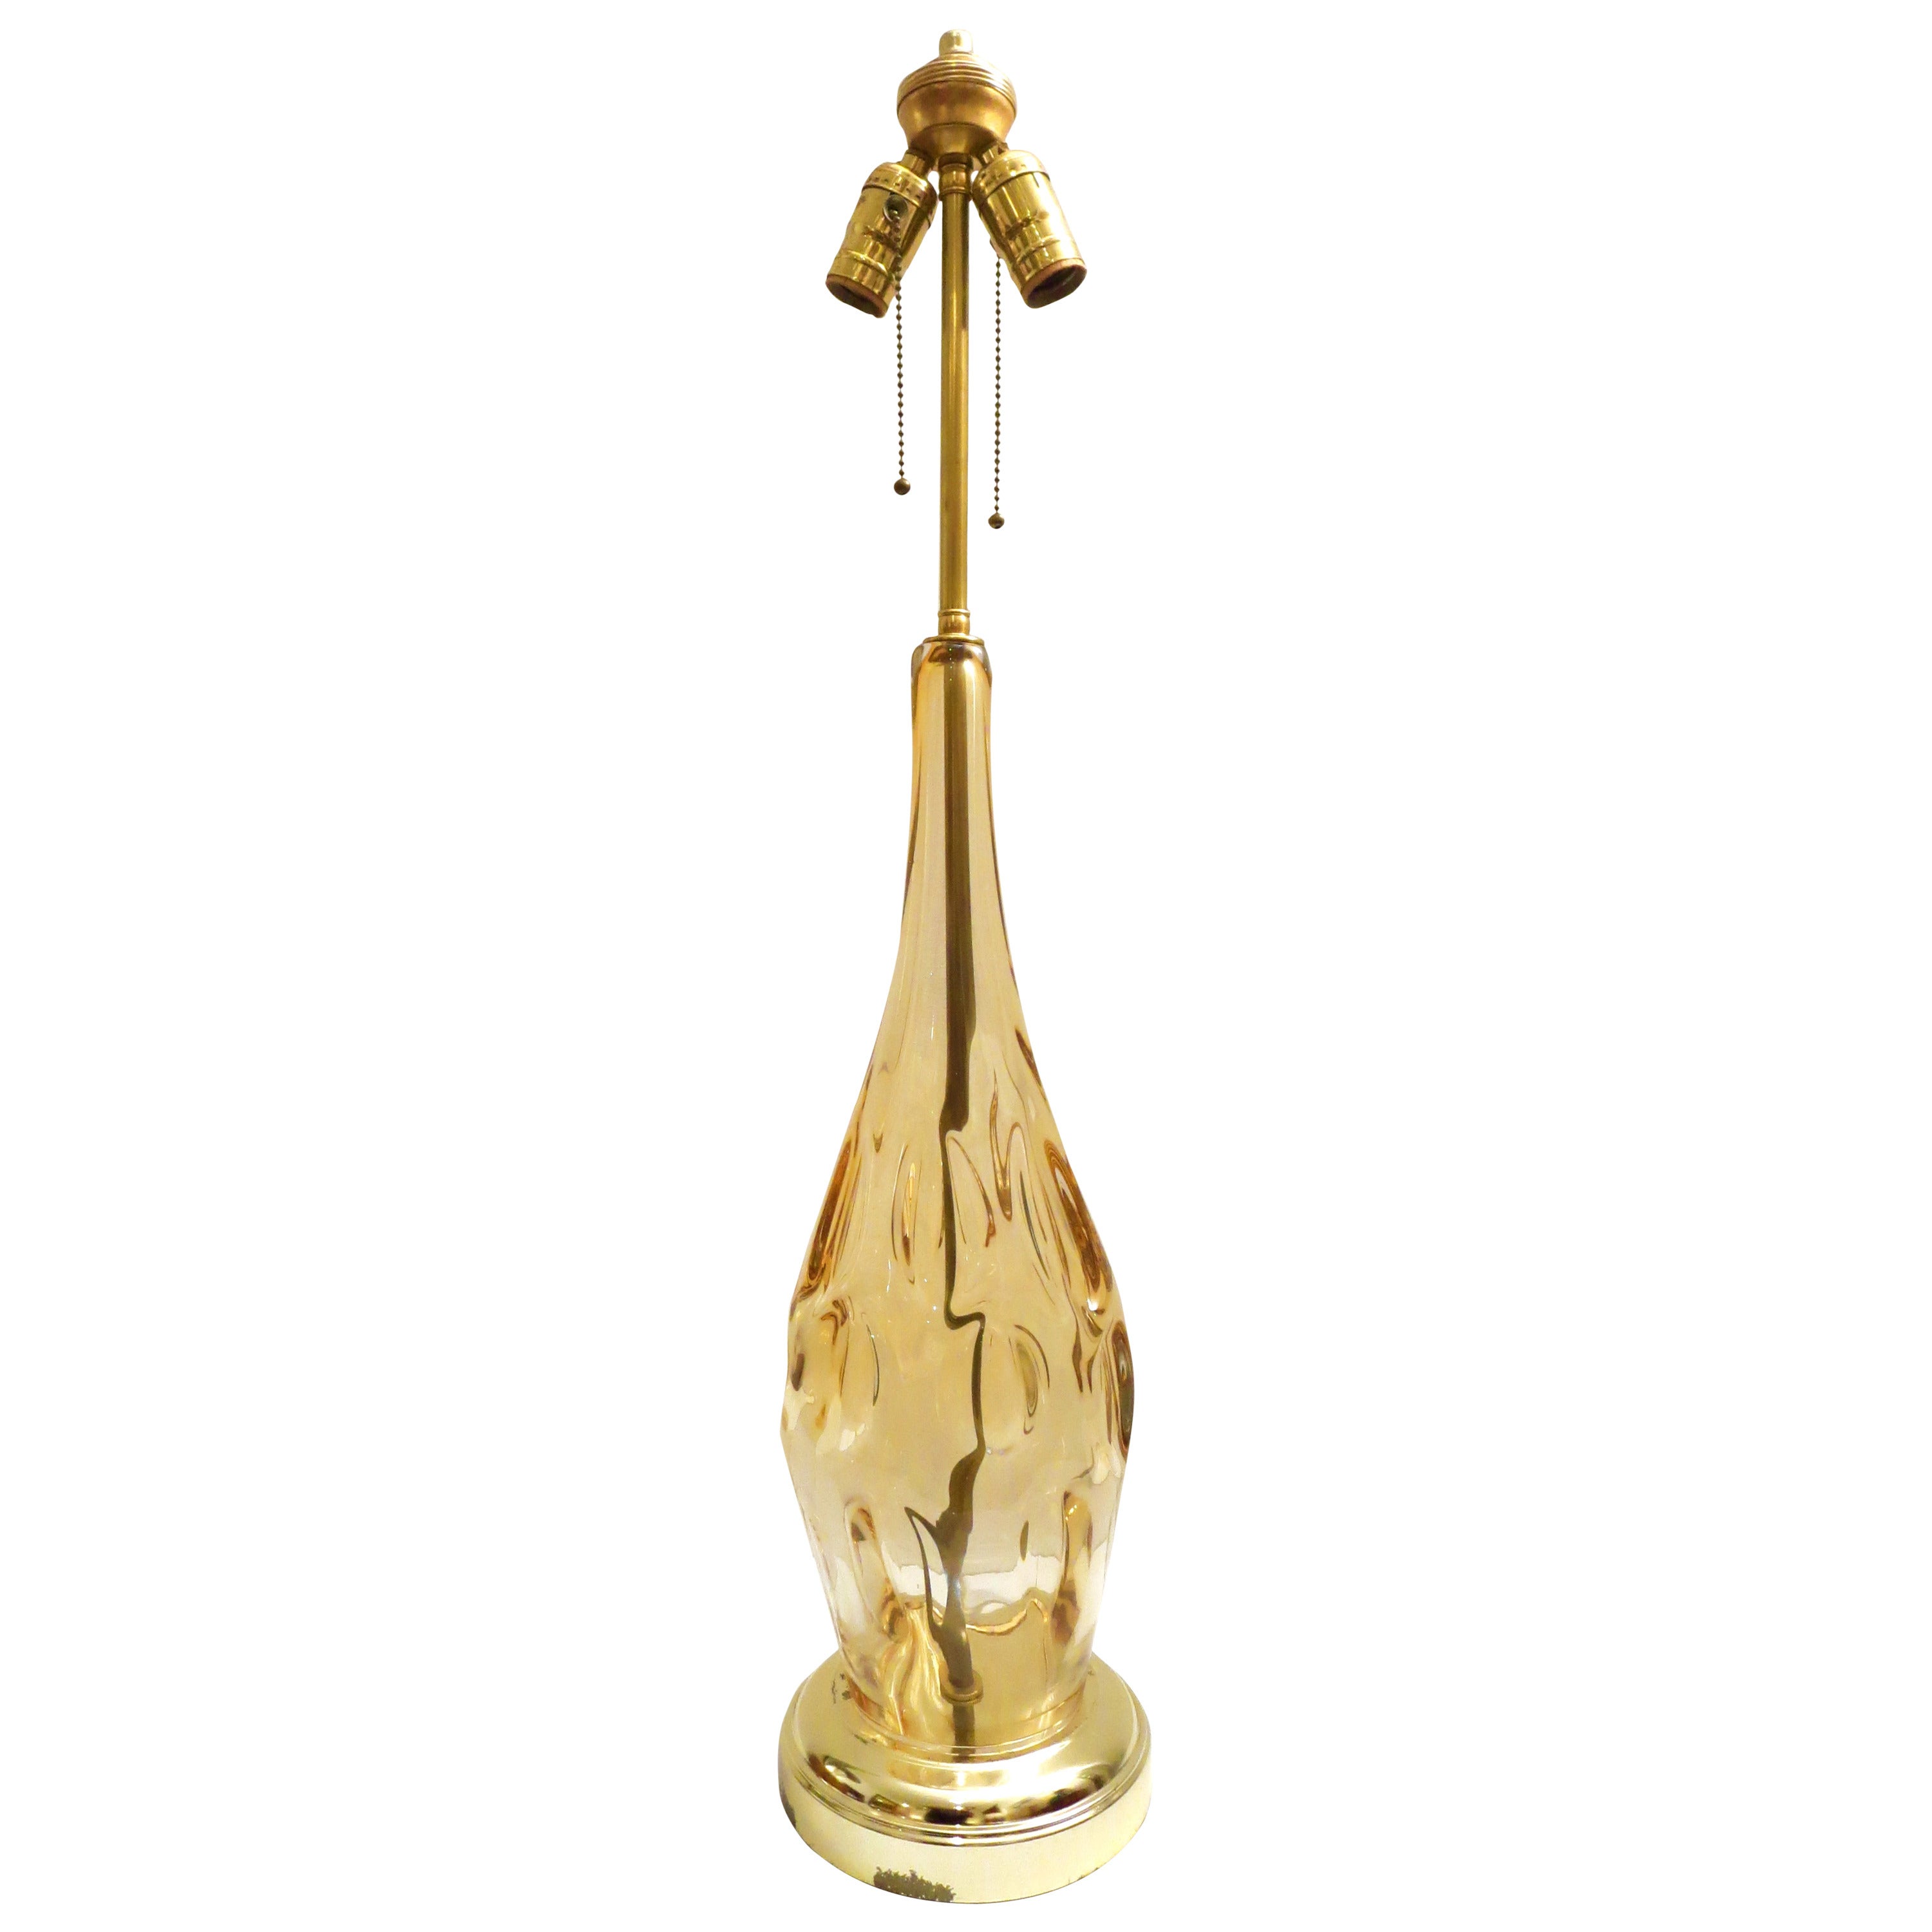 1950s Murano Italian tall thick scaloped glass lamp with brass fittings